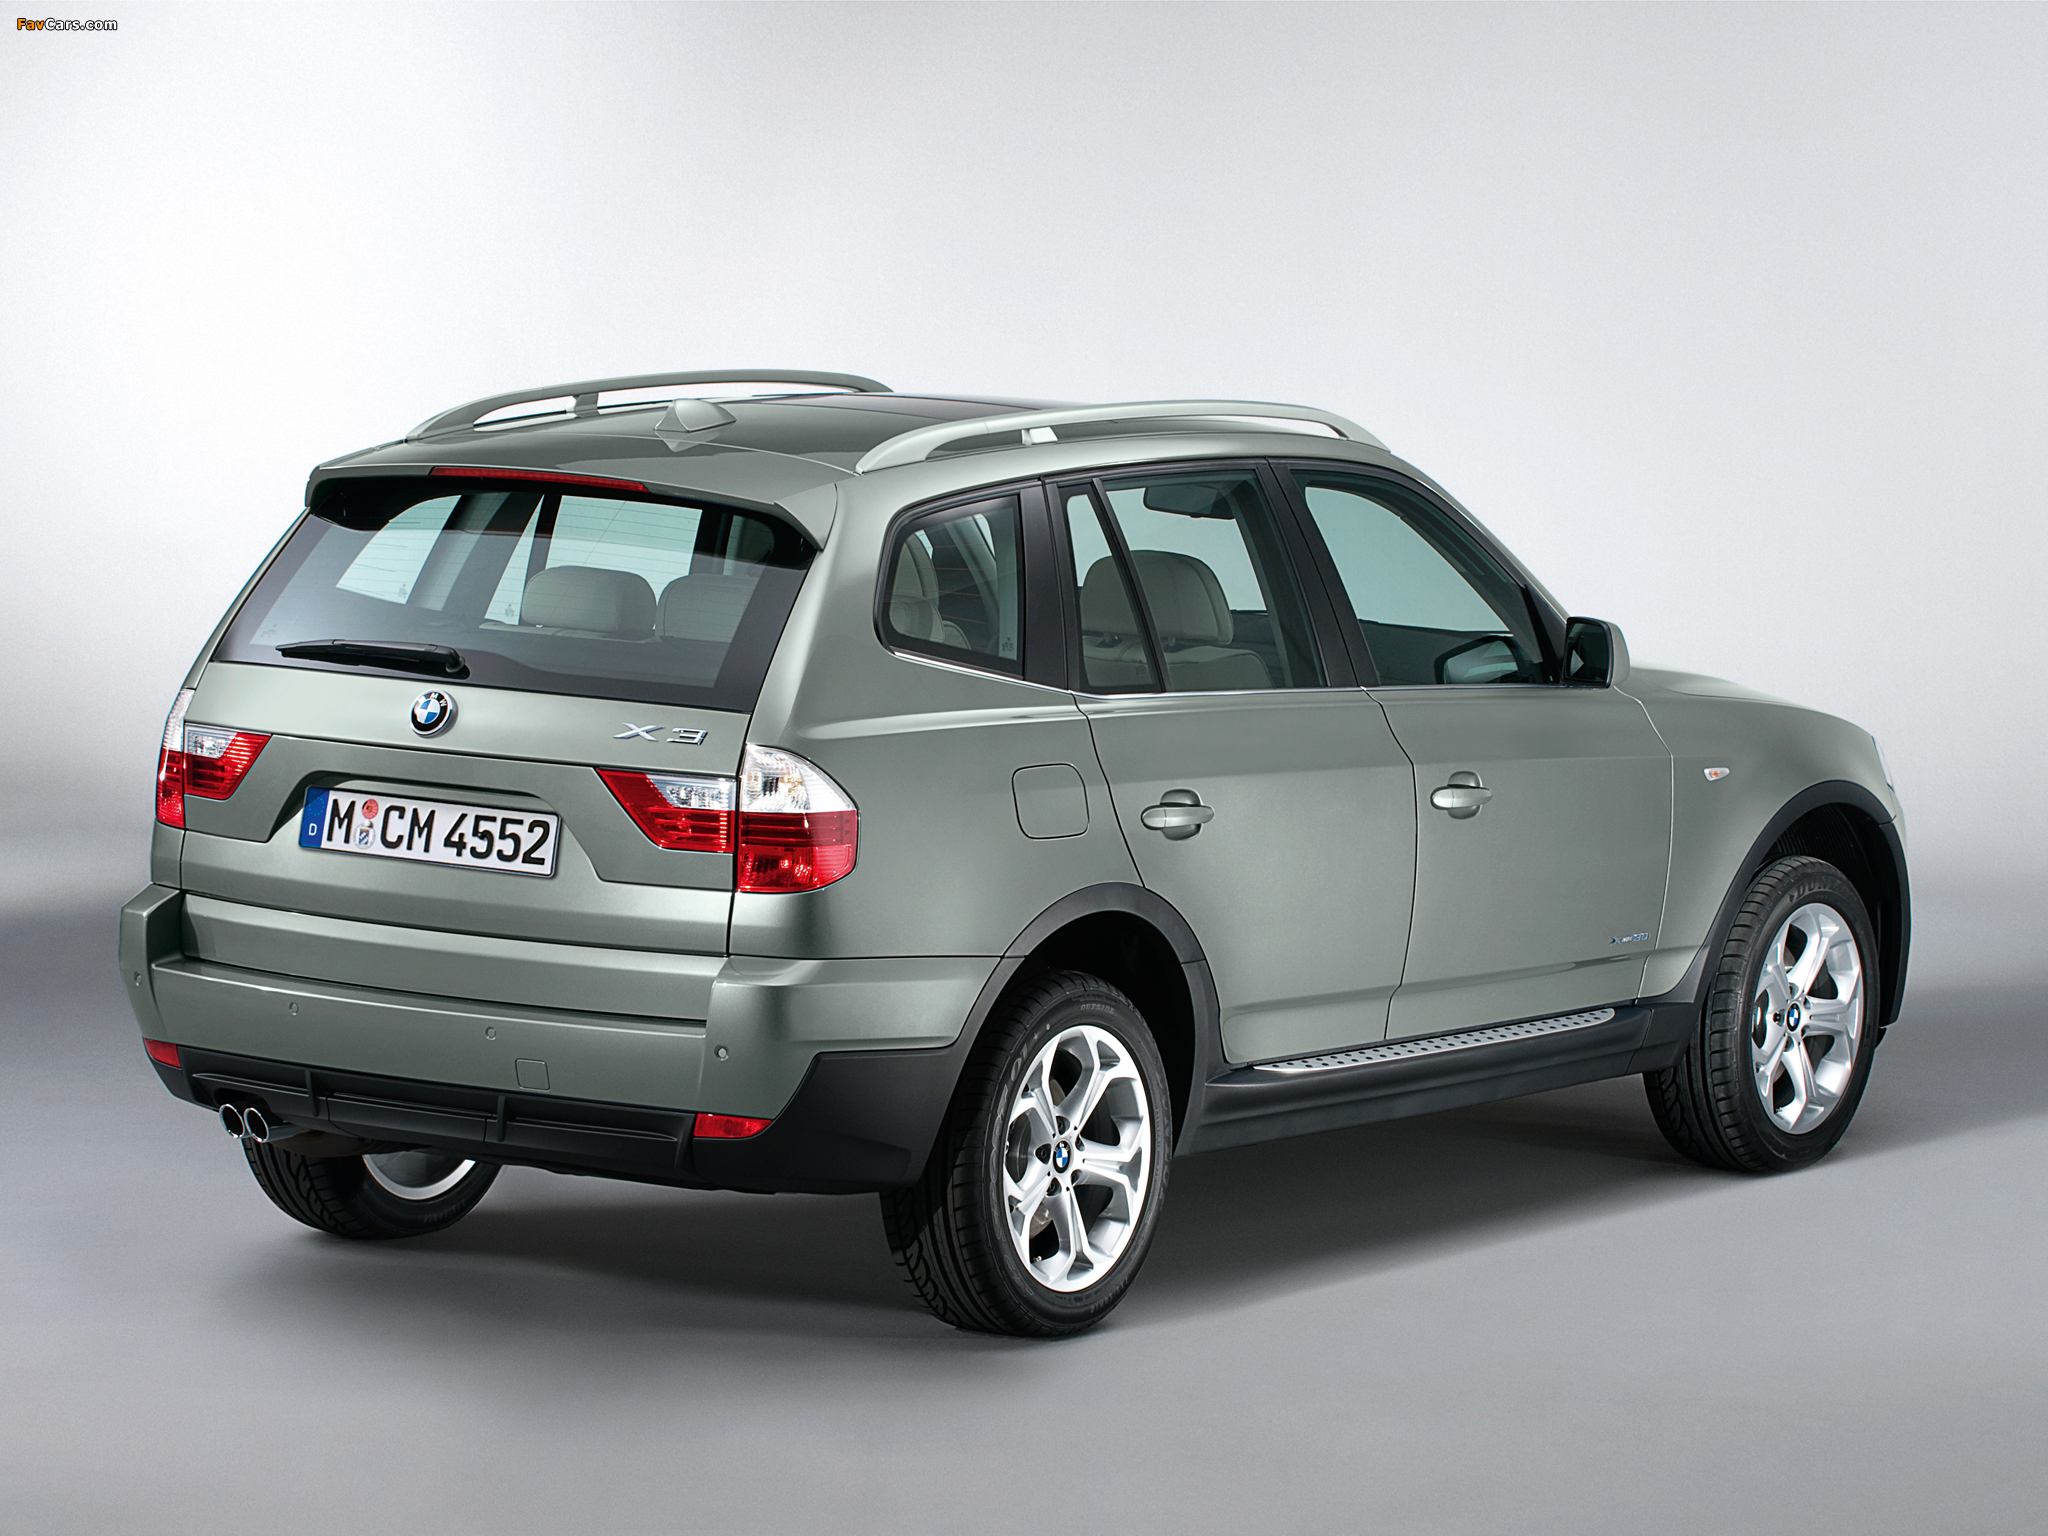 BMW X3 xDrive30i Exclusive Edition (E83) 2008 wallpapers (2048 x 1536)